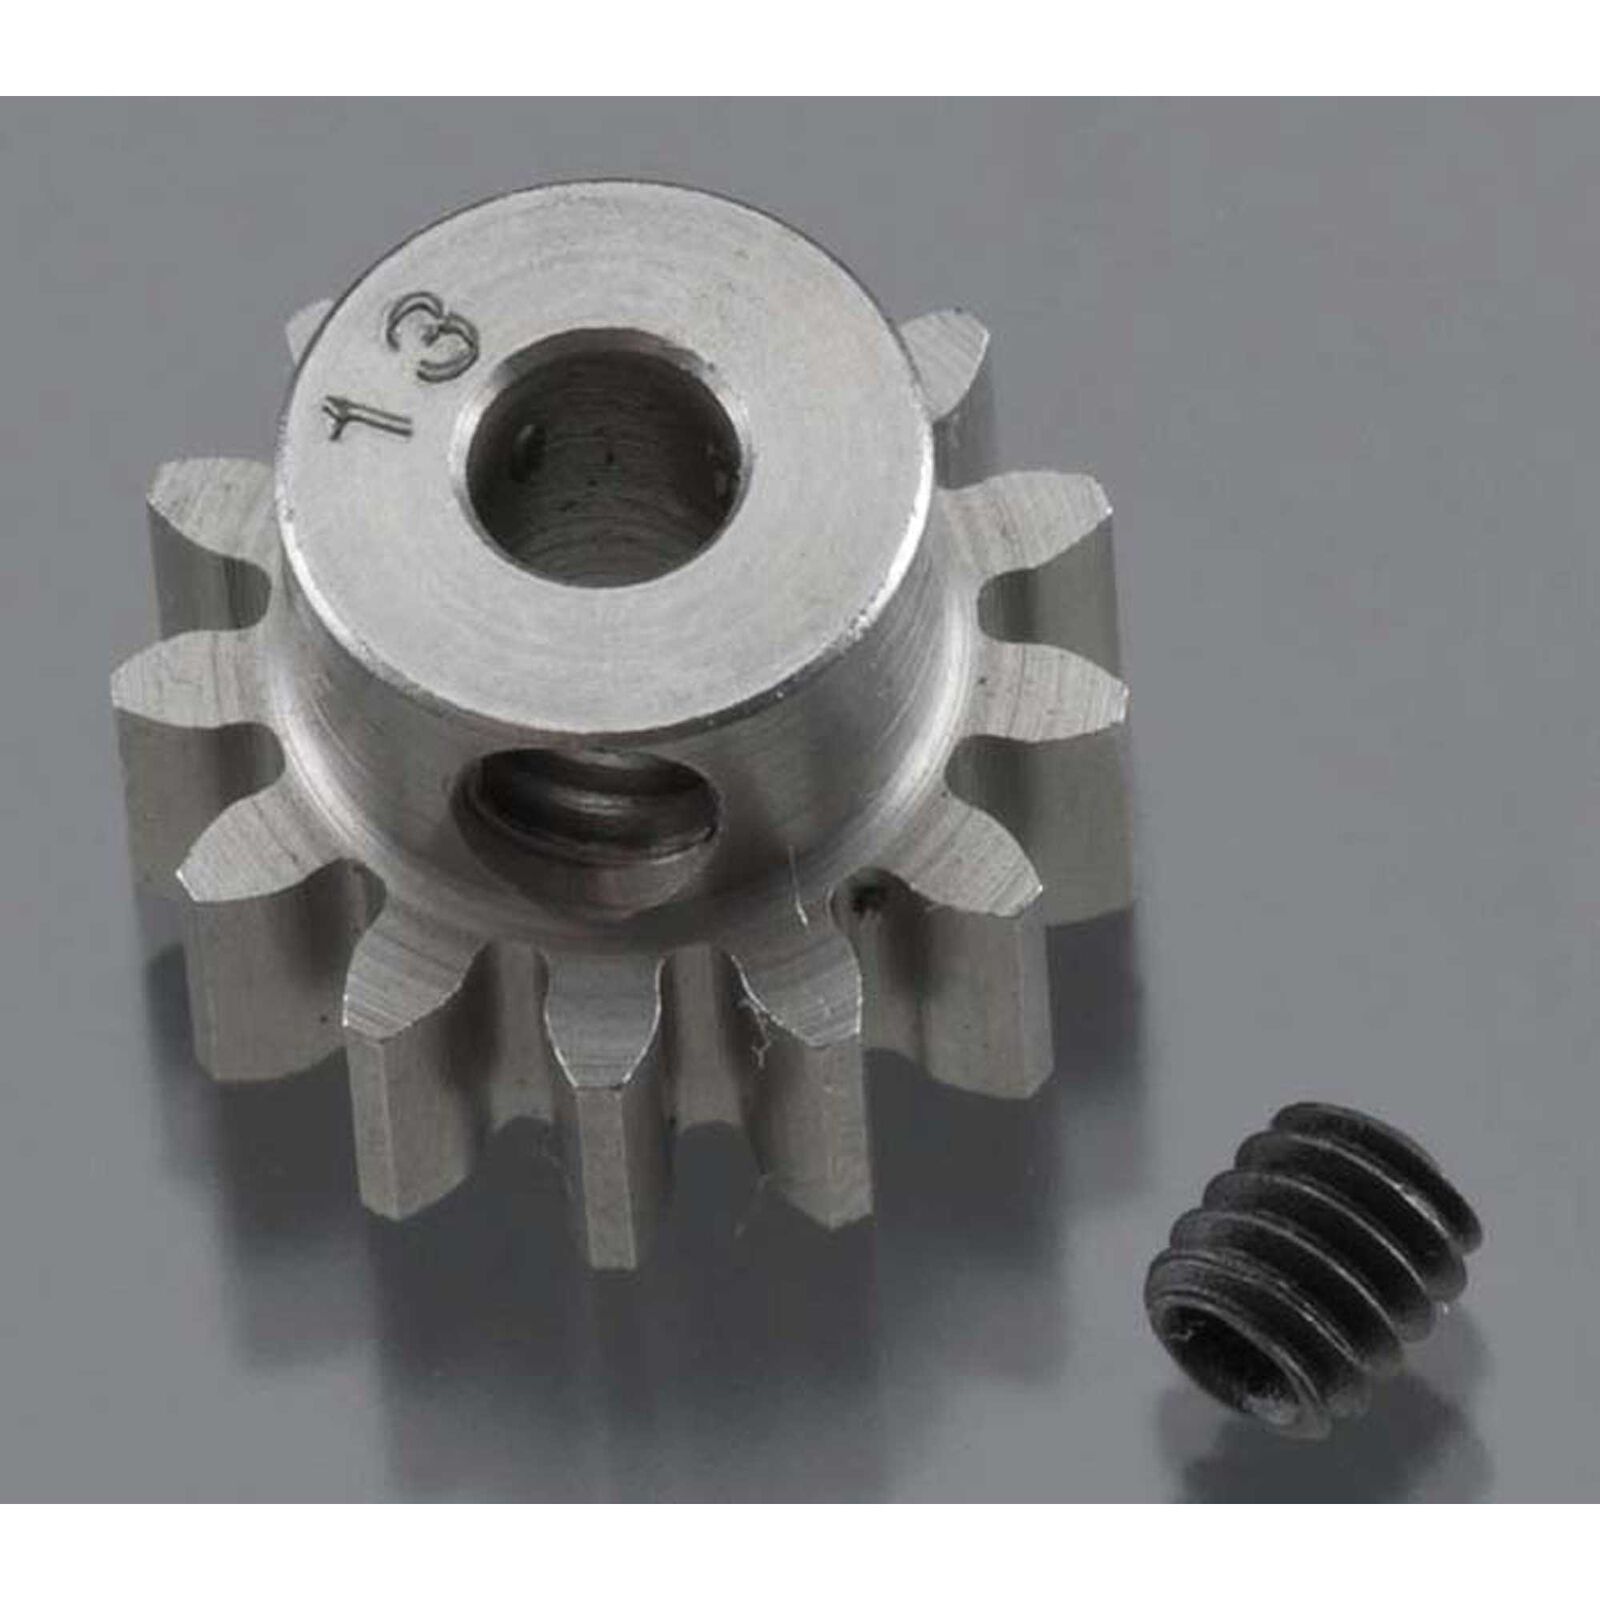 Hardened 32P Absolute Pinion, 13T